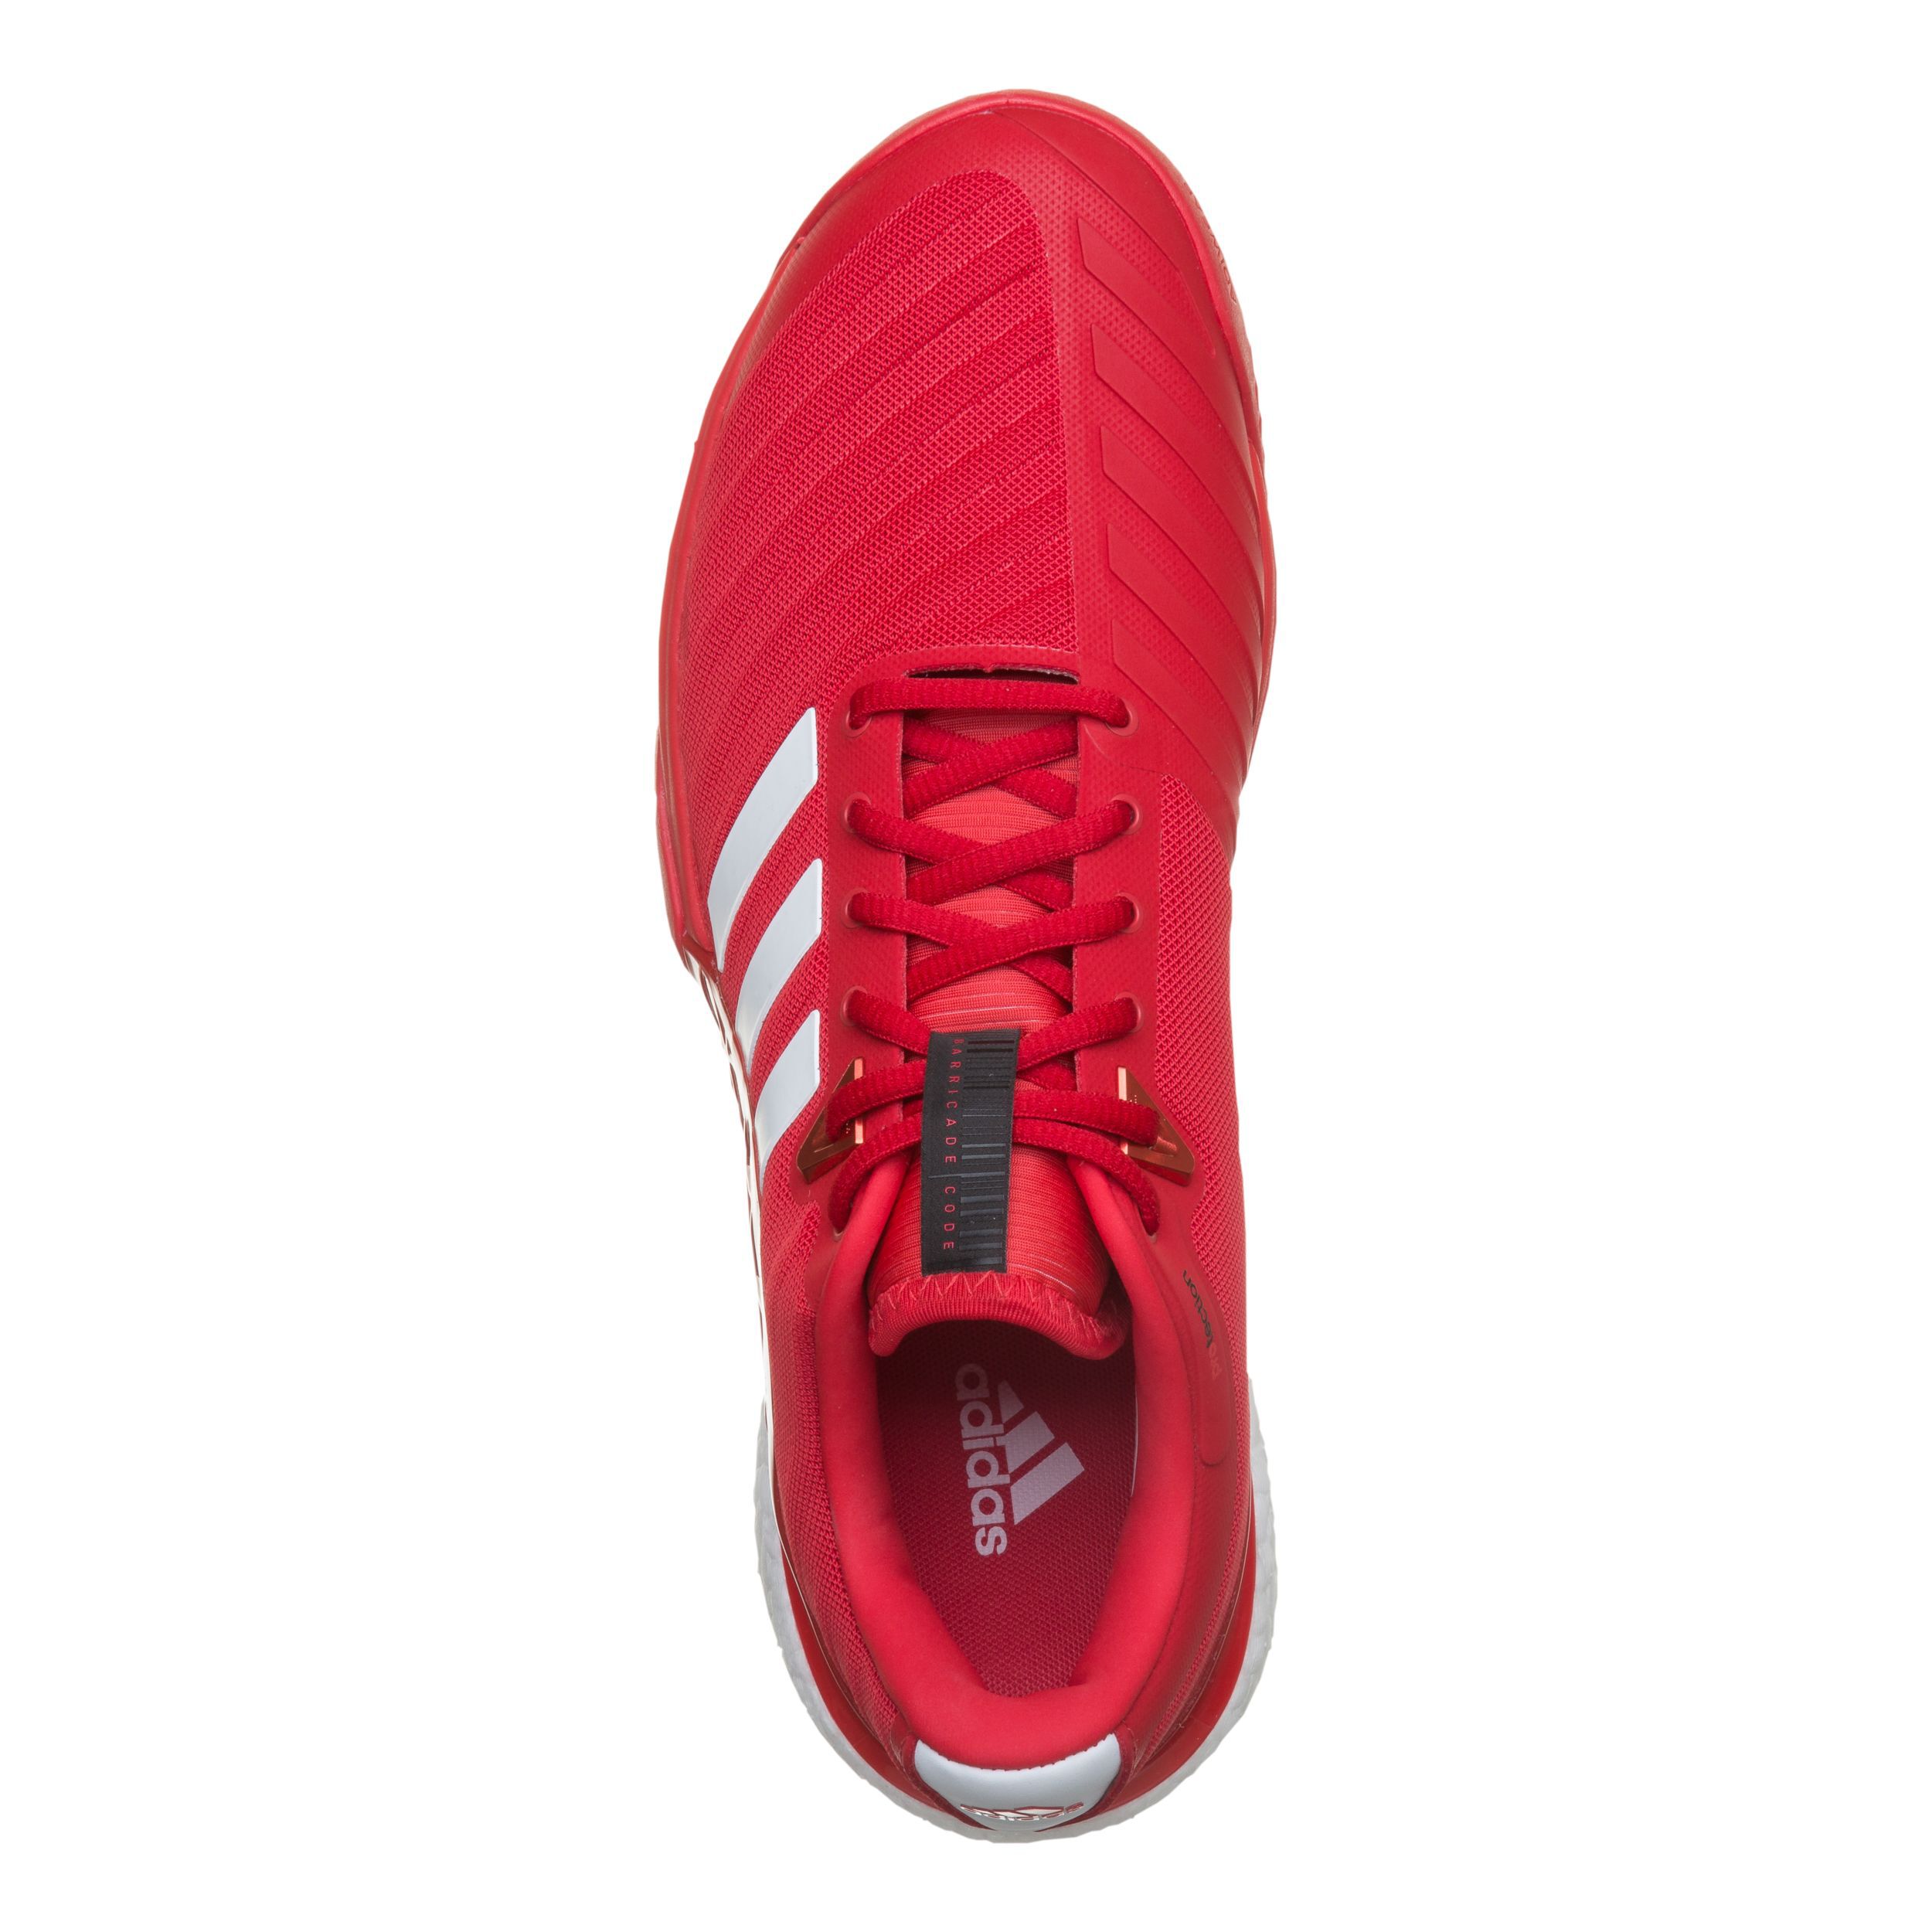 adidas Barricade Boost Chaussure Terre Battue Hommes - Rouge ...